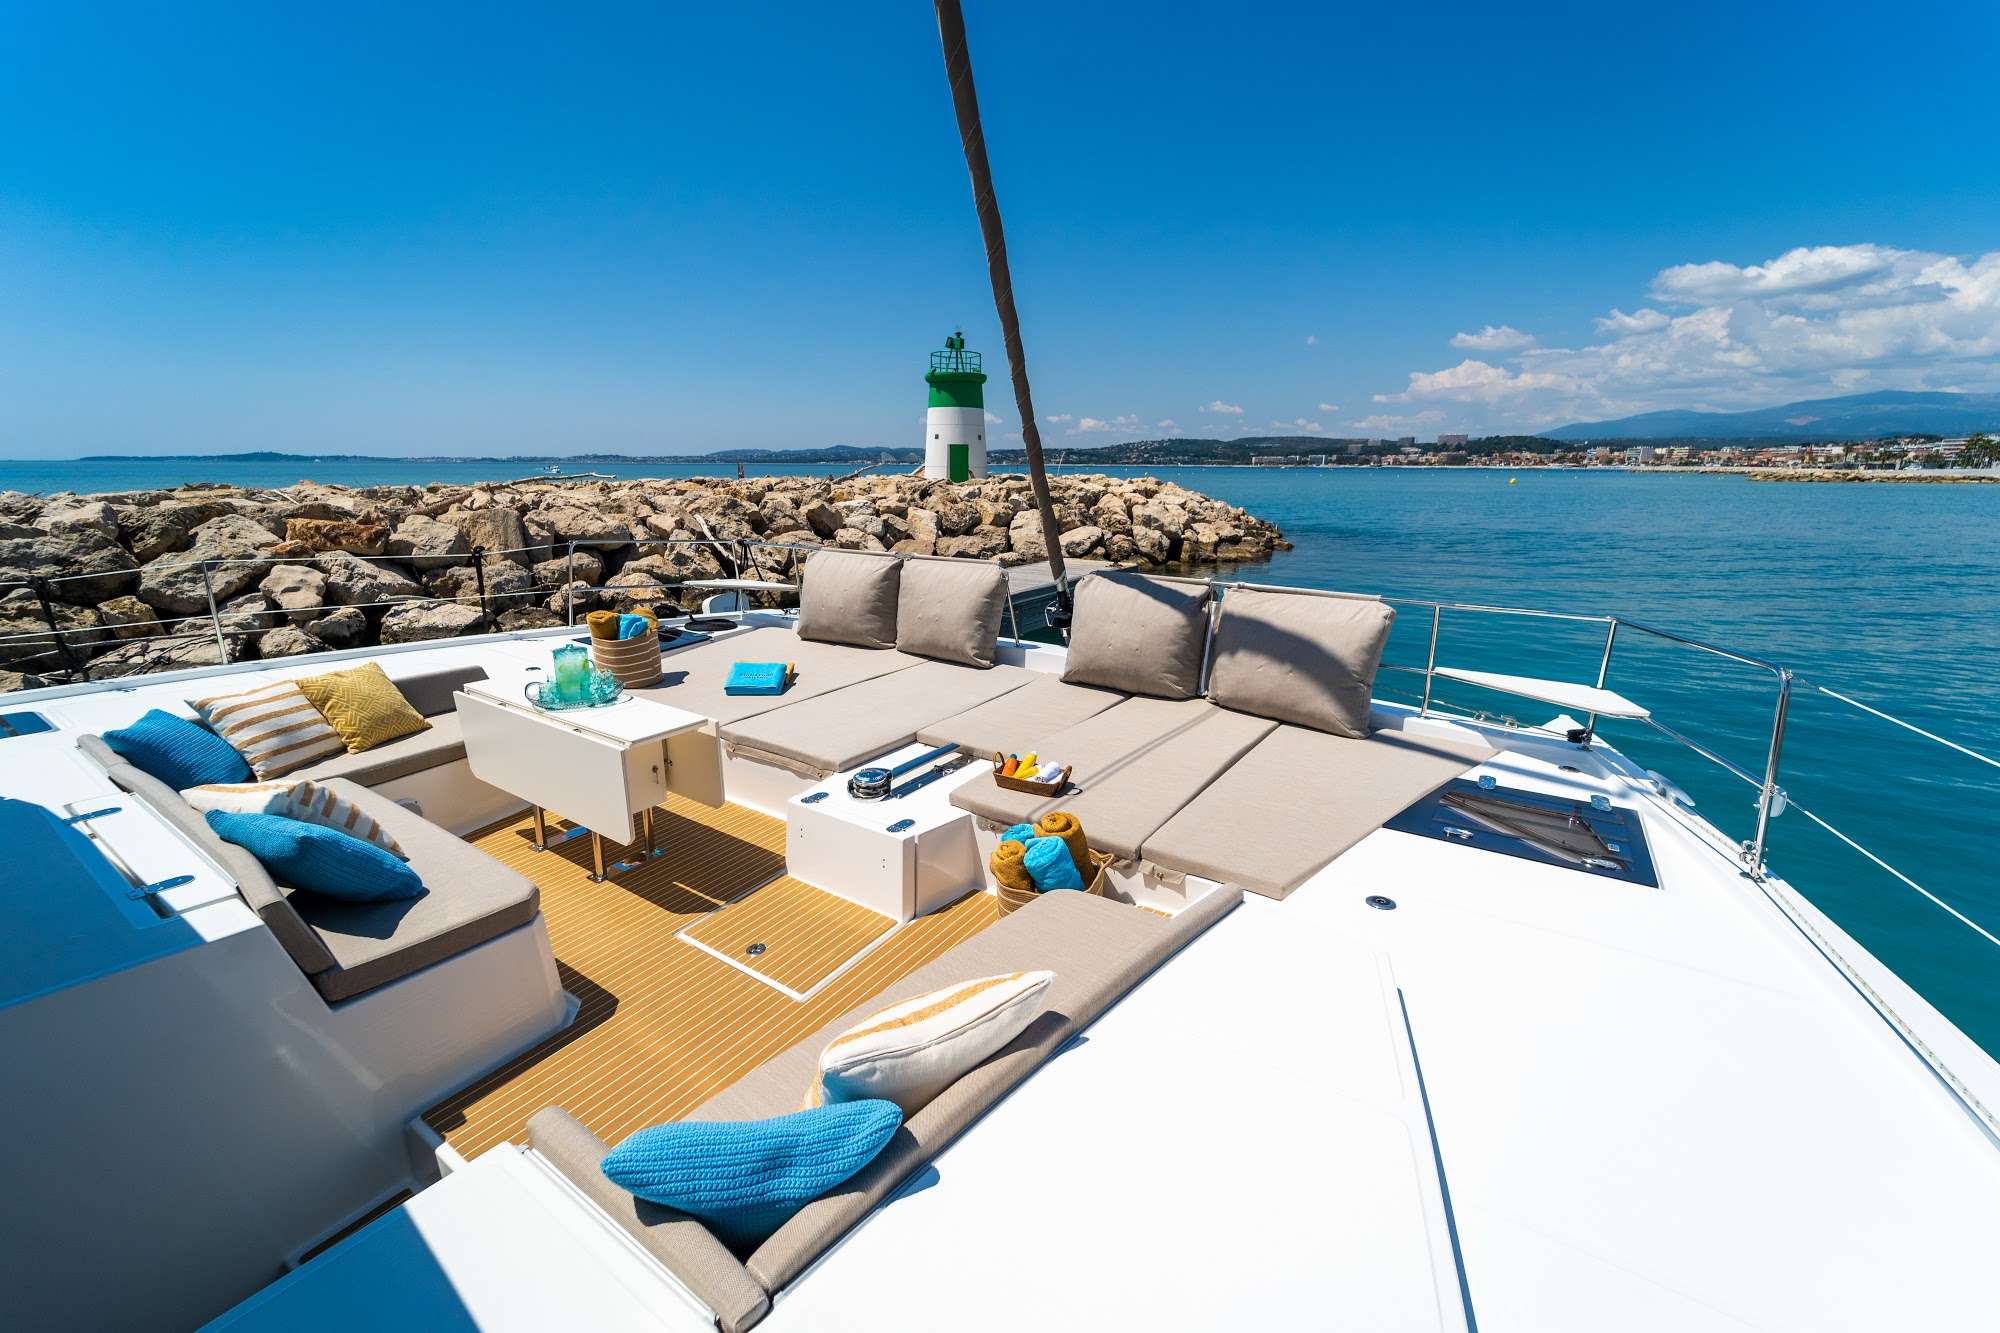 Signature Vision - Yacht Charter Marina di Pisticci & Boat hire in Europe (Spain, France, Italy) 4